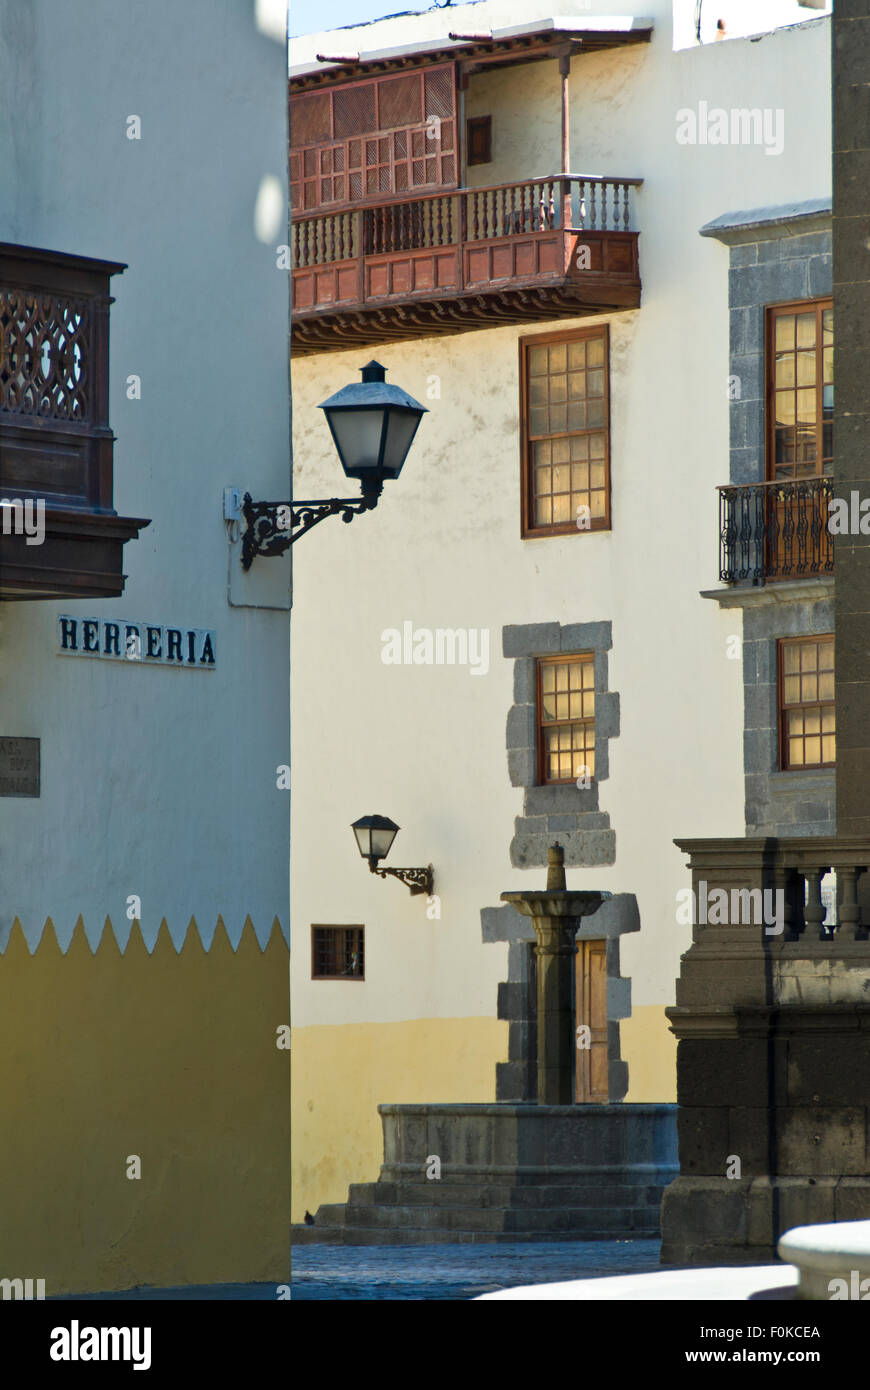 Old town Las Palmas street scene with typical balconies and Canary architecture Vegueta Las Palmas de Gran Canaria Spain Stock Photo